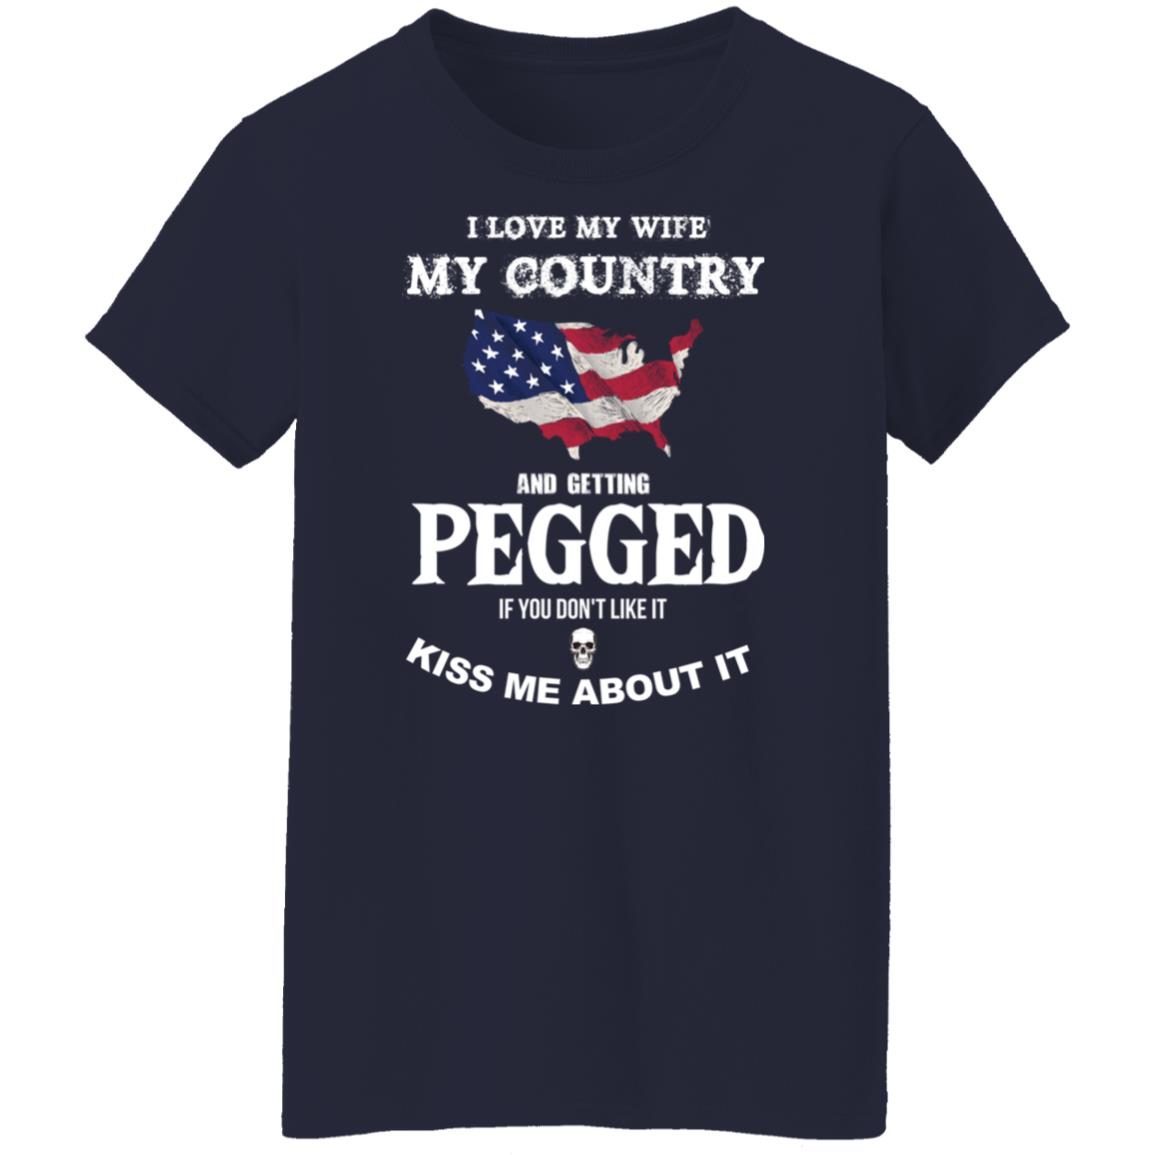 I love my wife my country and getting pegged shirt